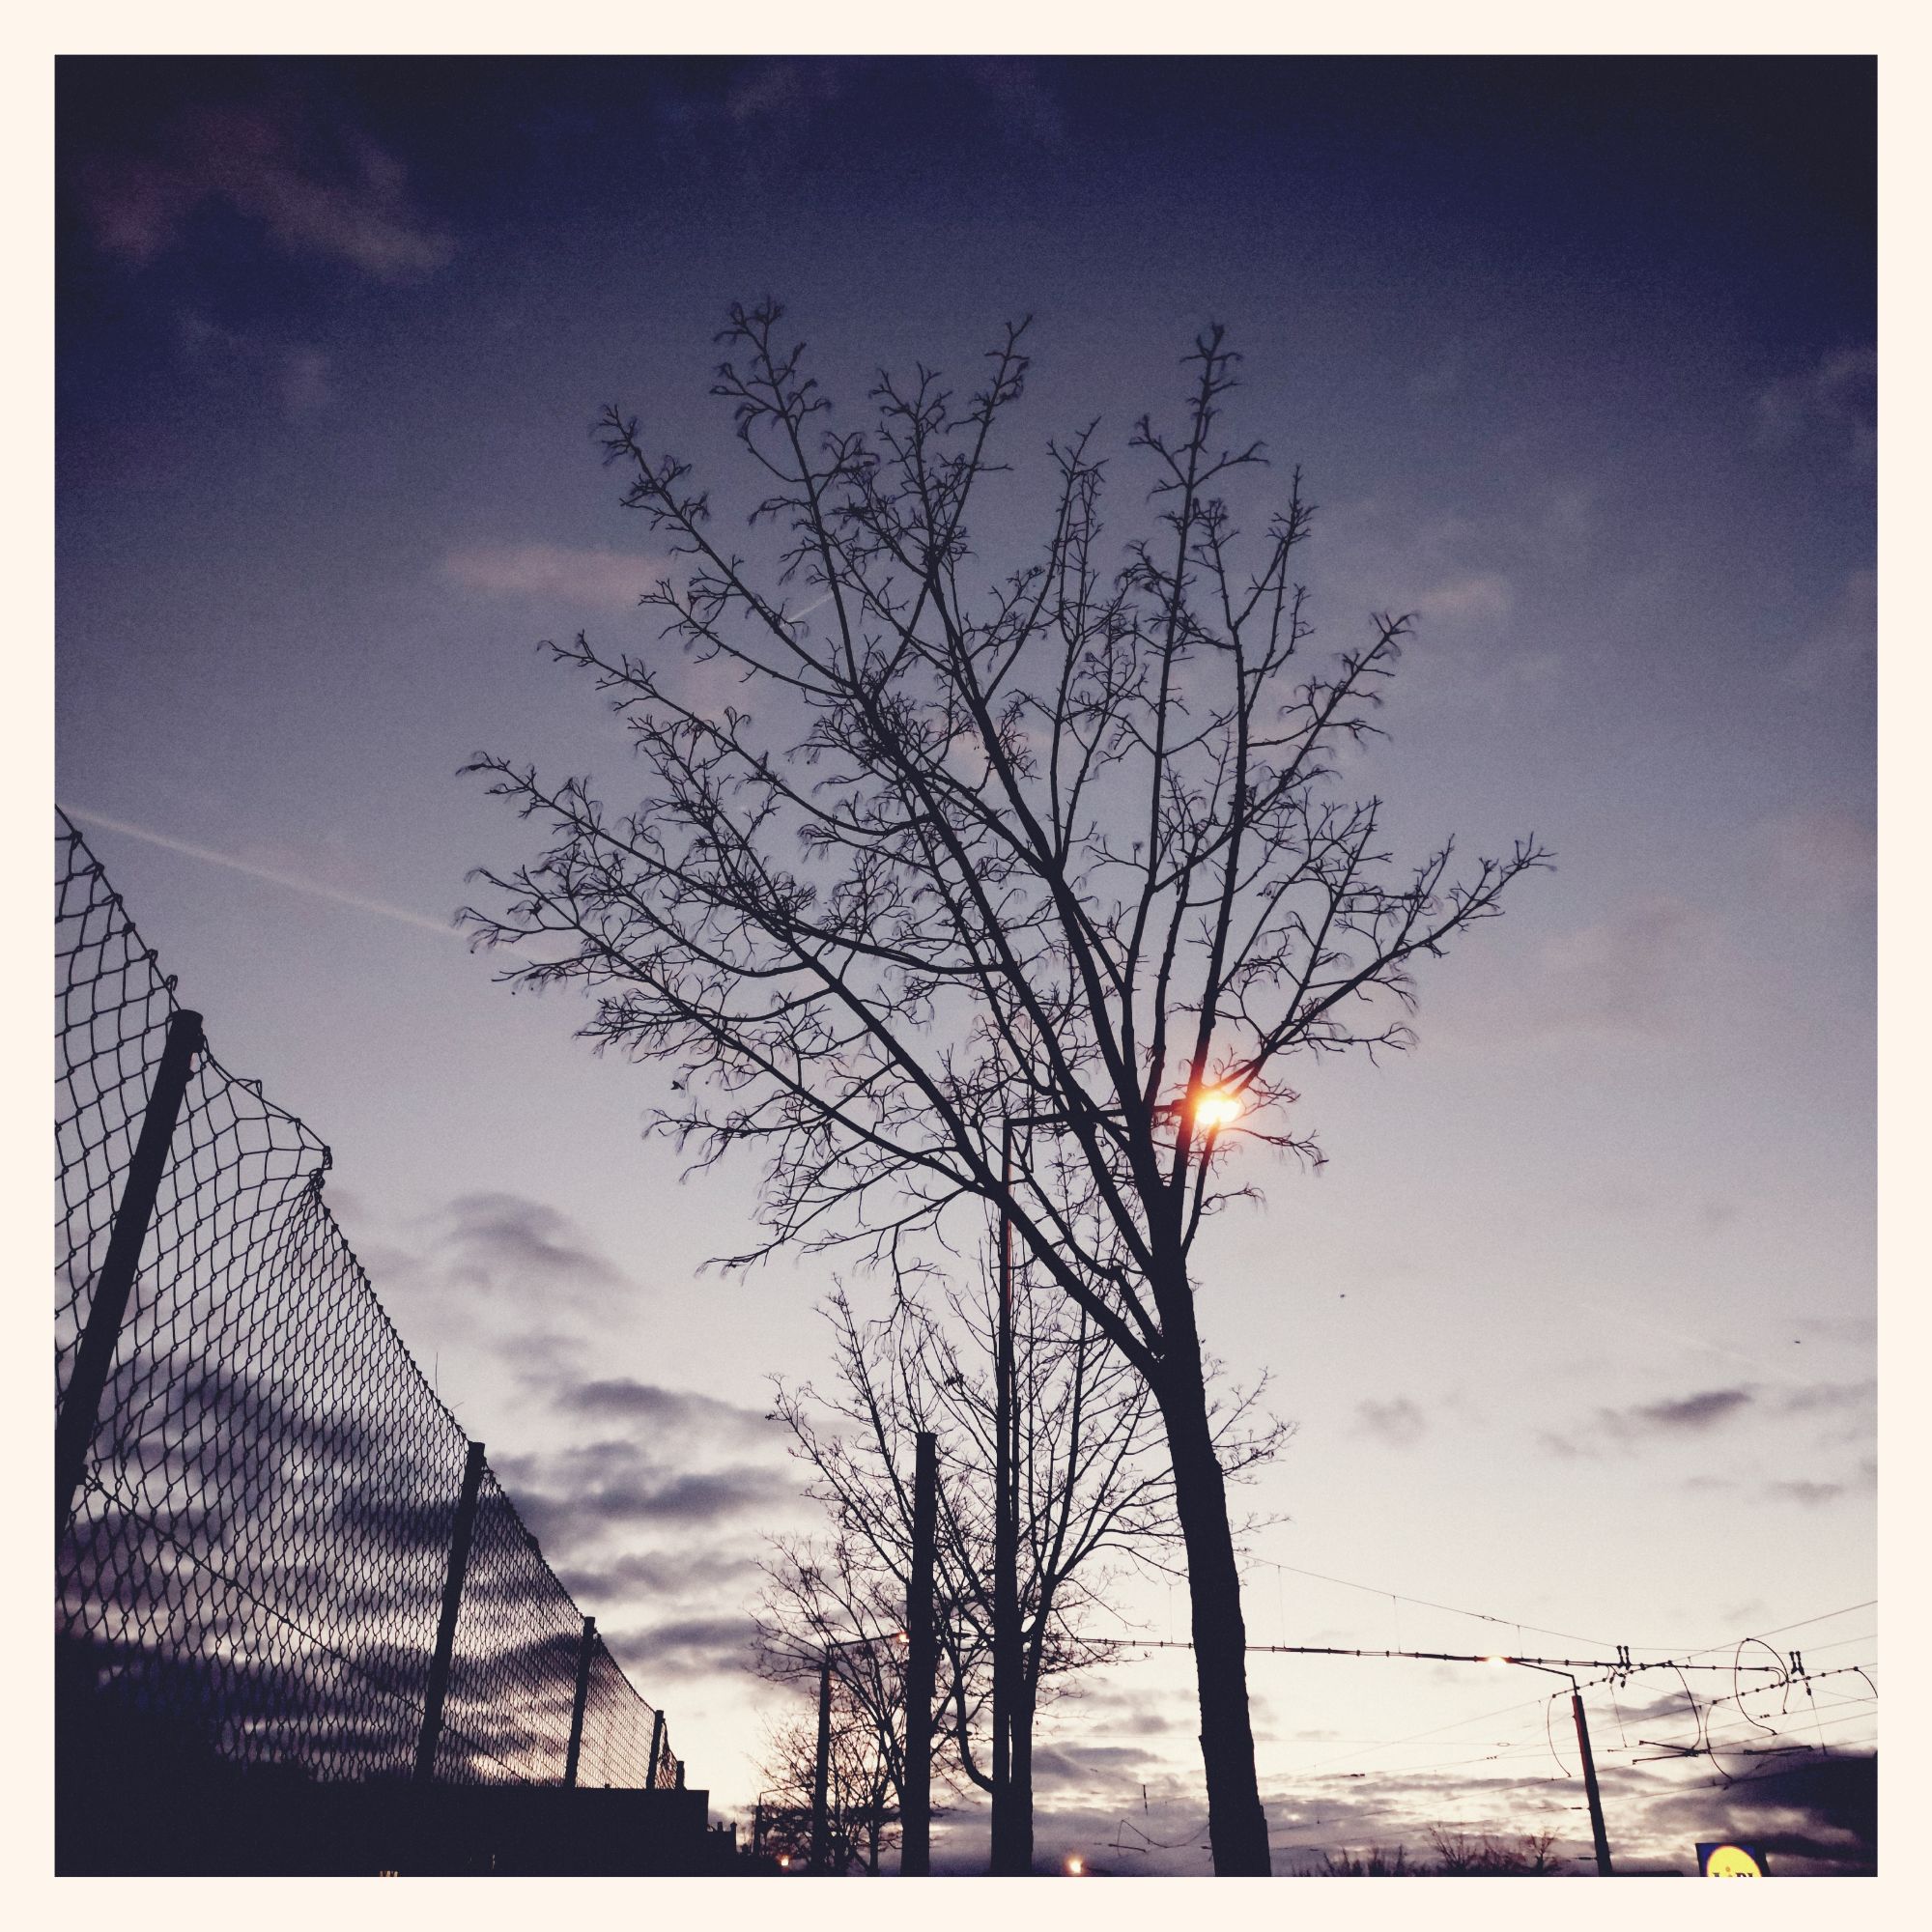 Wire fence, street trees, electric infrastructure and a lantern under an evening sky.